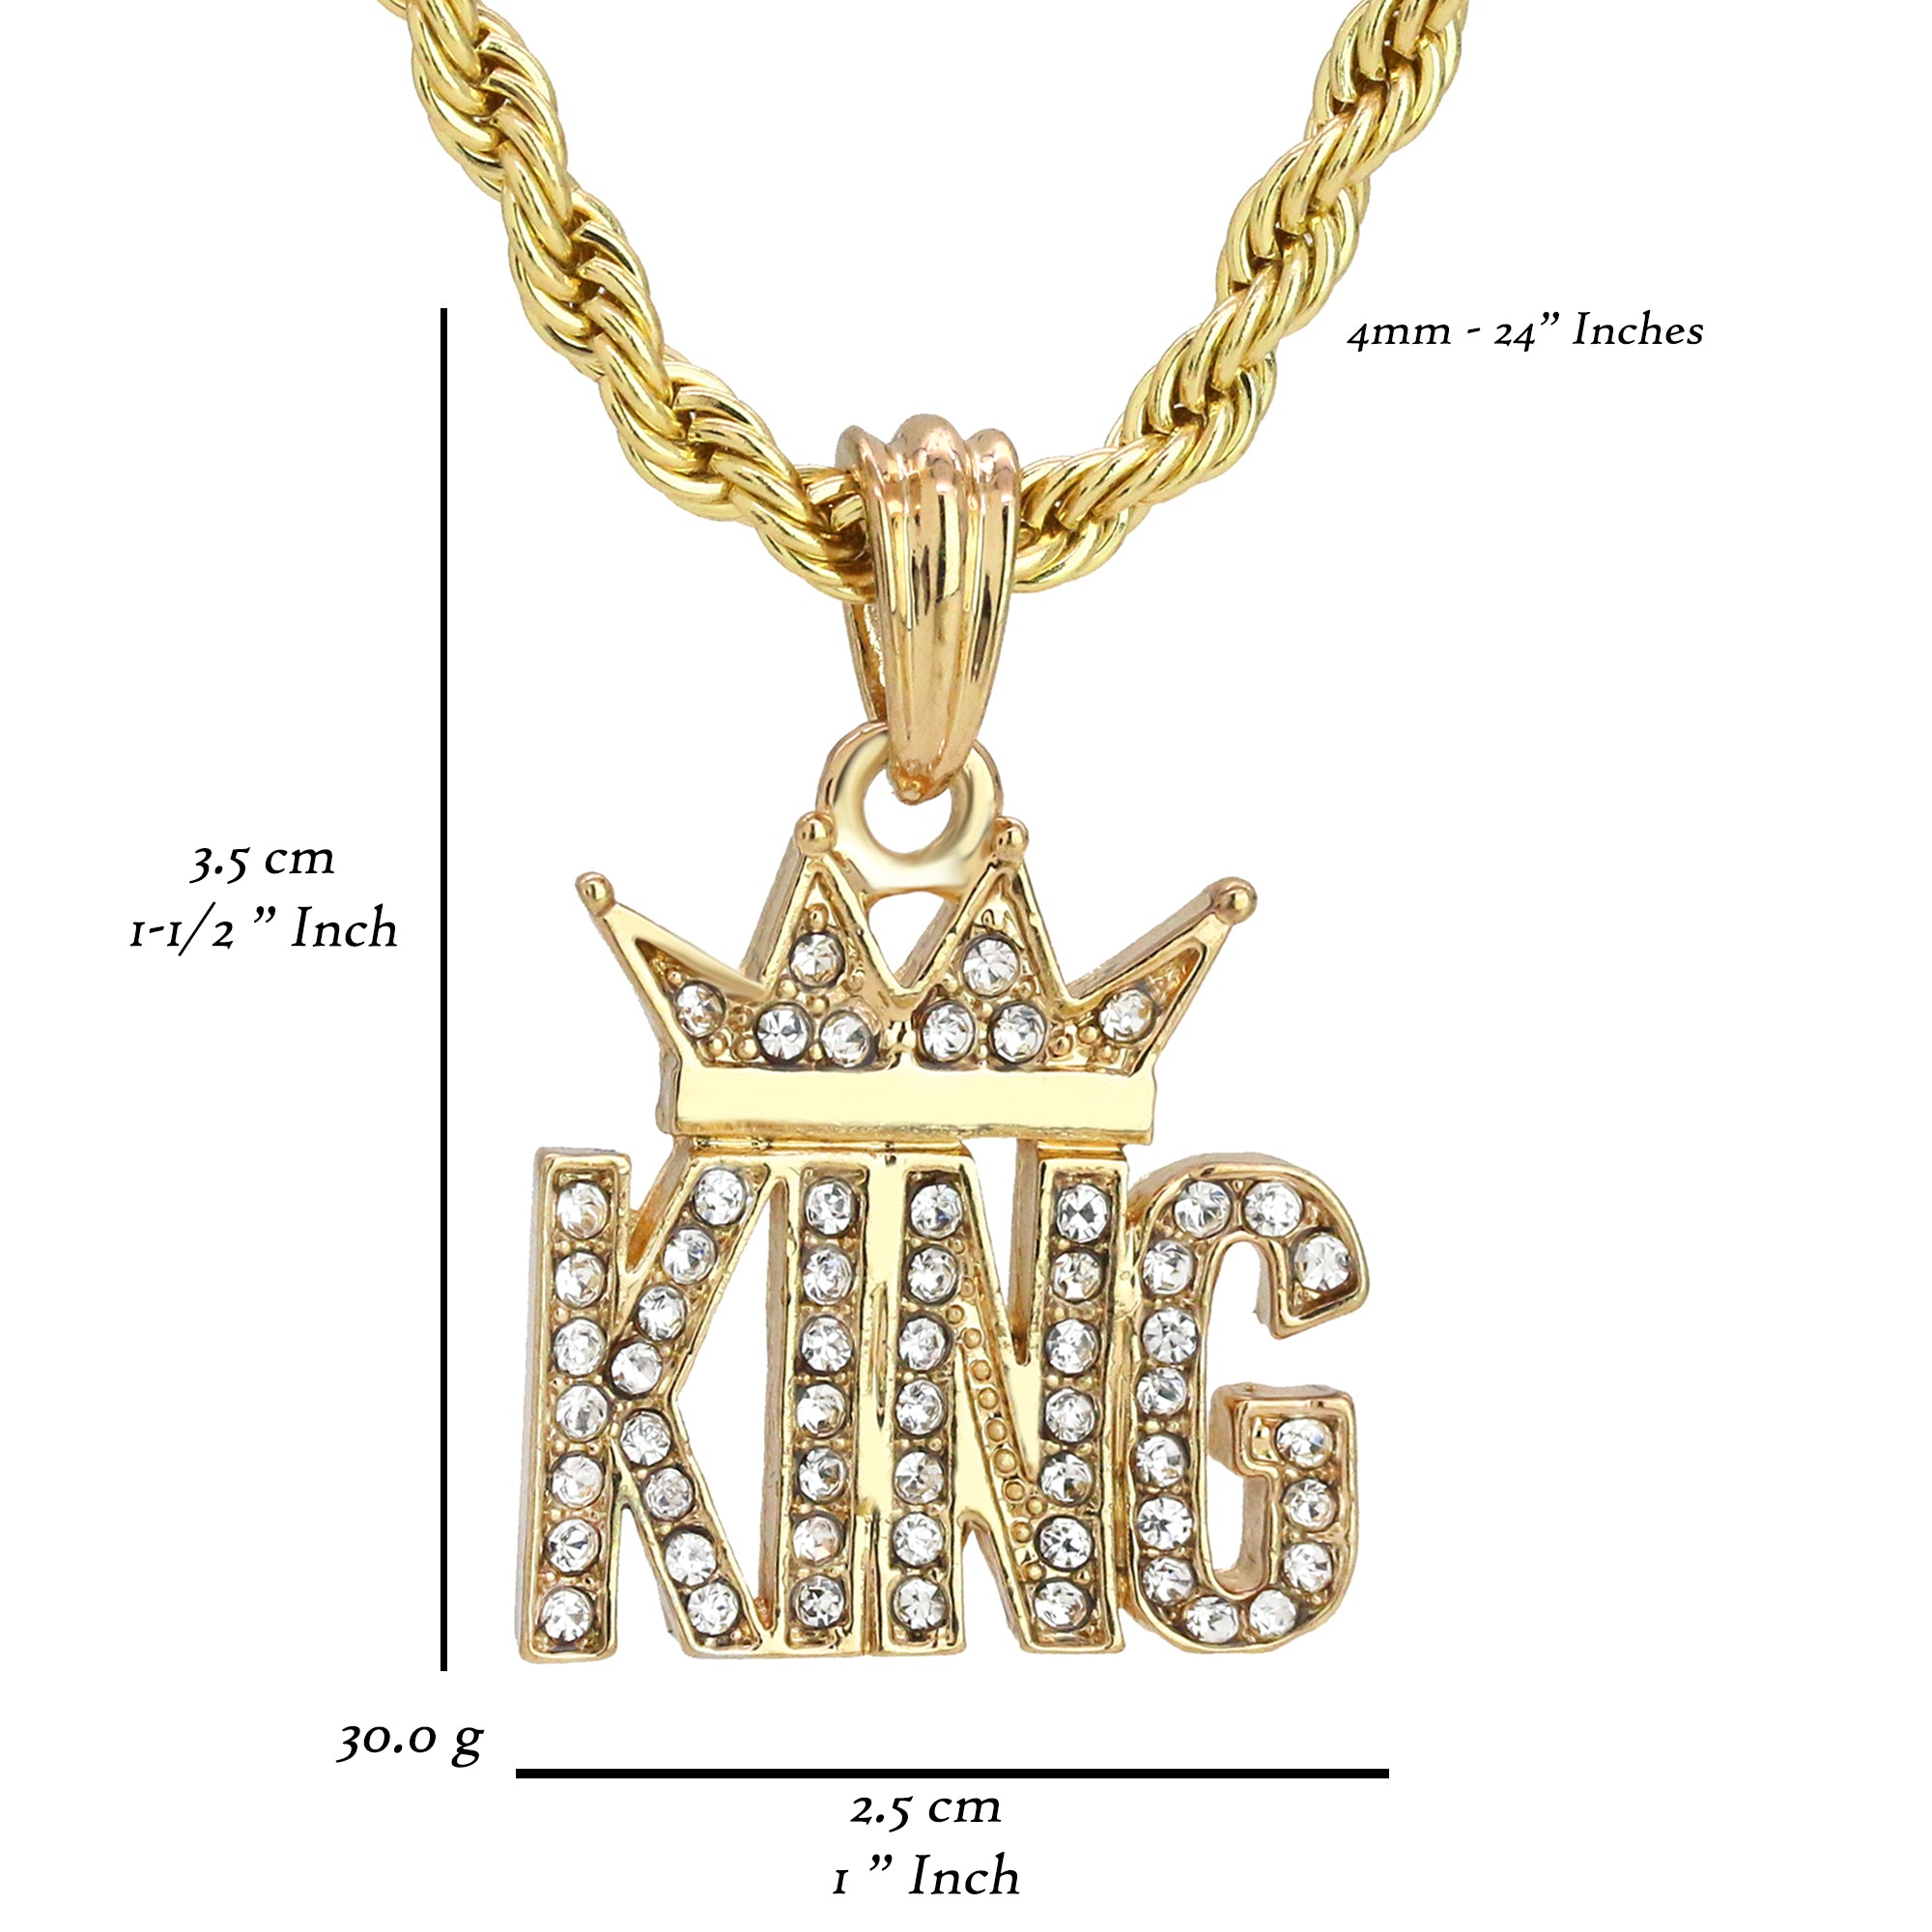 King Crowned Pendant 24" Rope Chain Men's Hip Hop 18k Jewelry